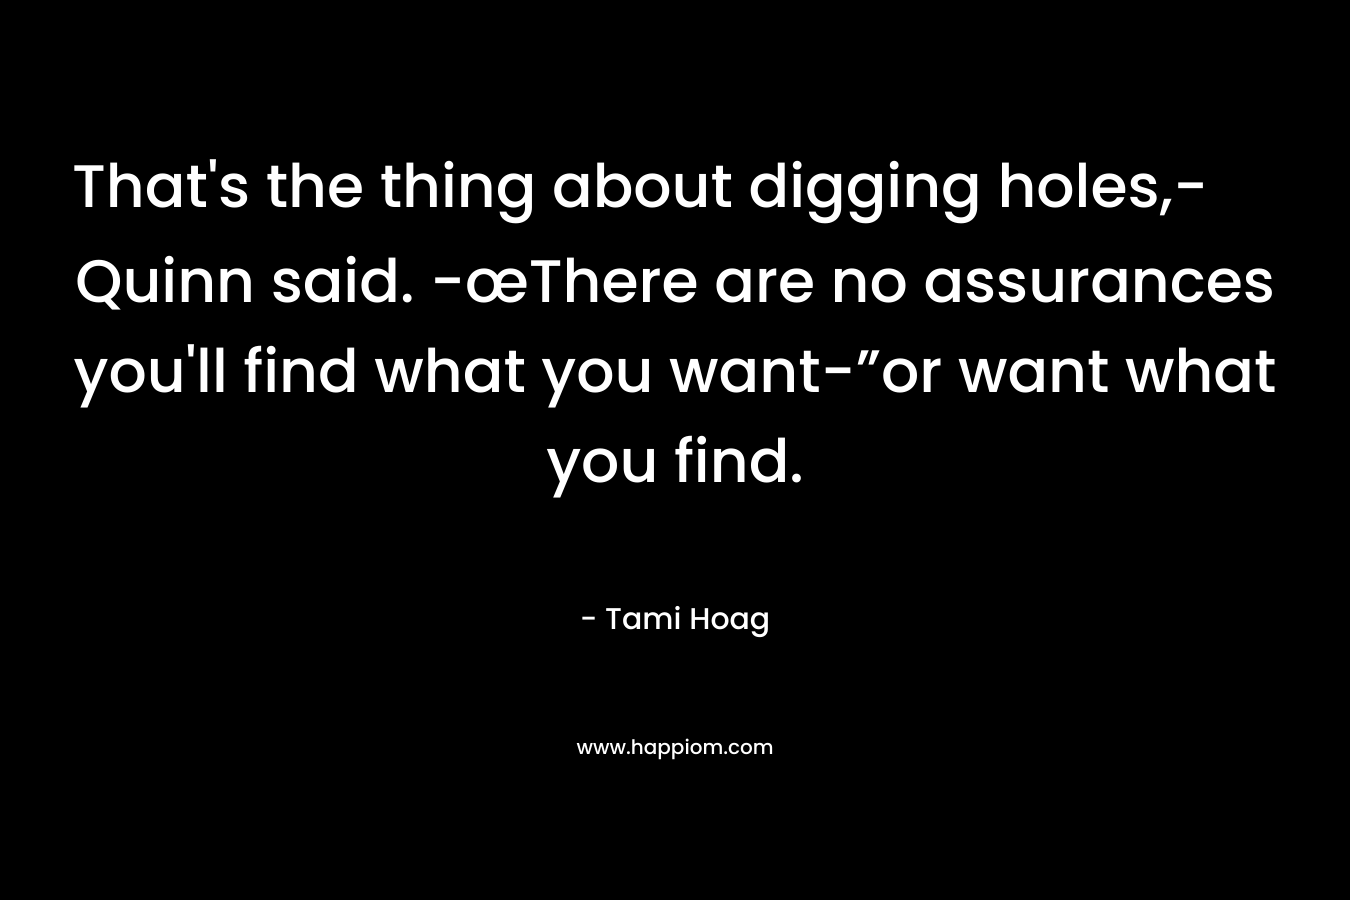 That's the thing about digging holes,- Quinn said. -œThere are no assurances you'll find what you want-”or want what you find.